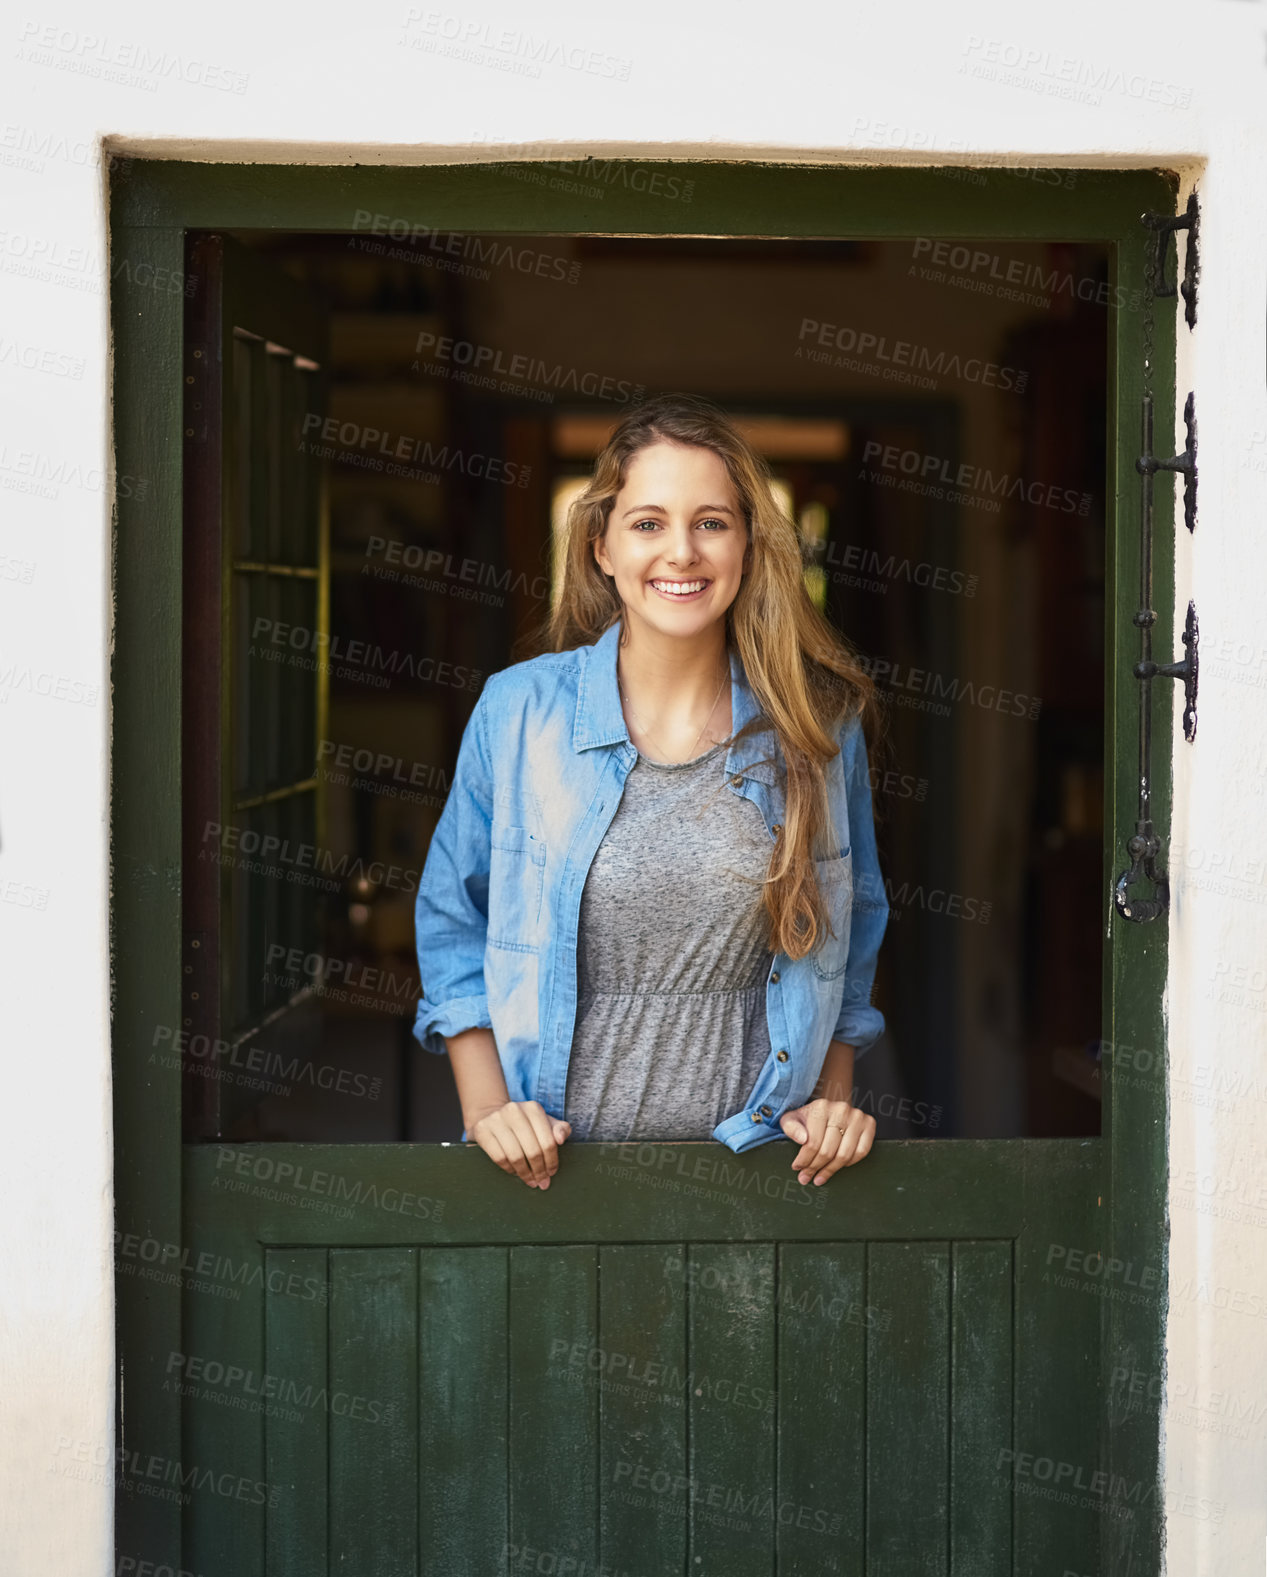 Buy stock photo Portrait of an attractive young woman standing by her back door